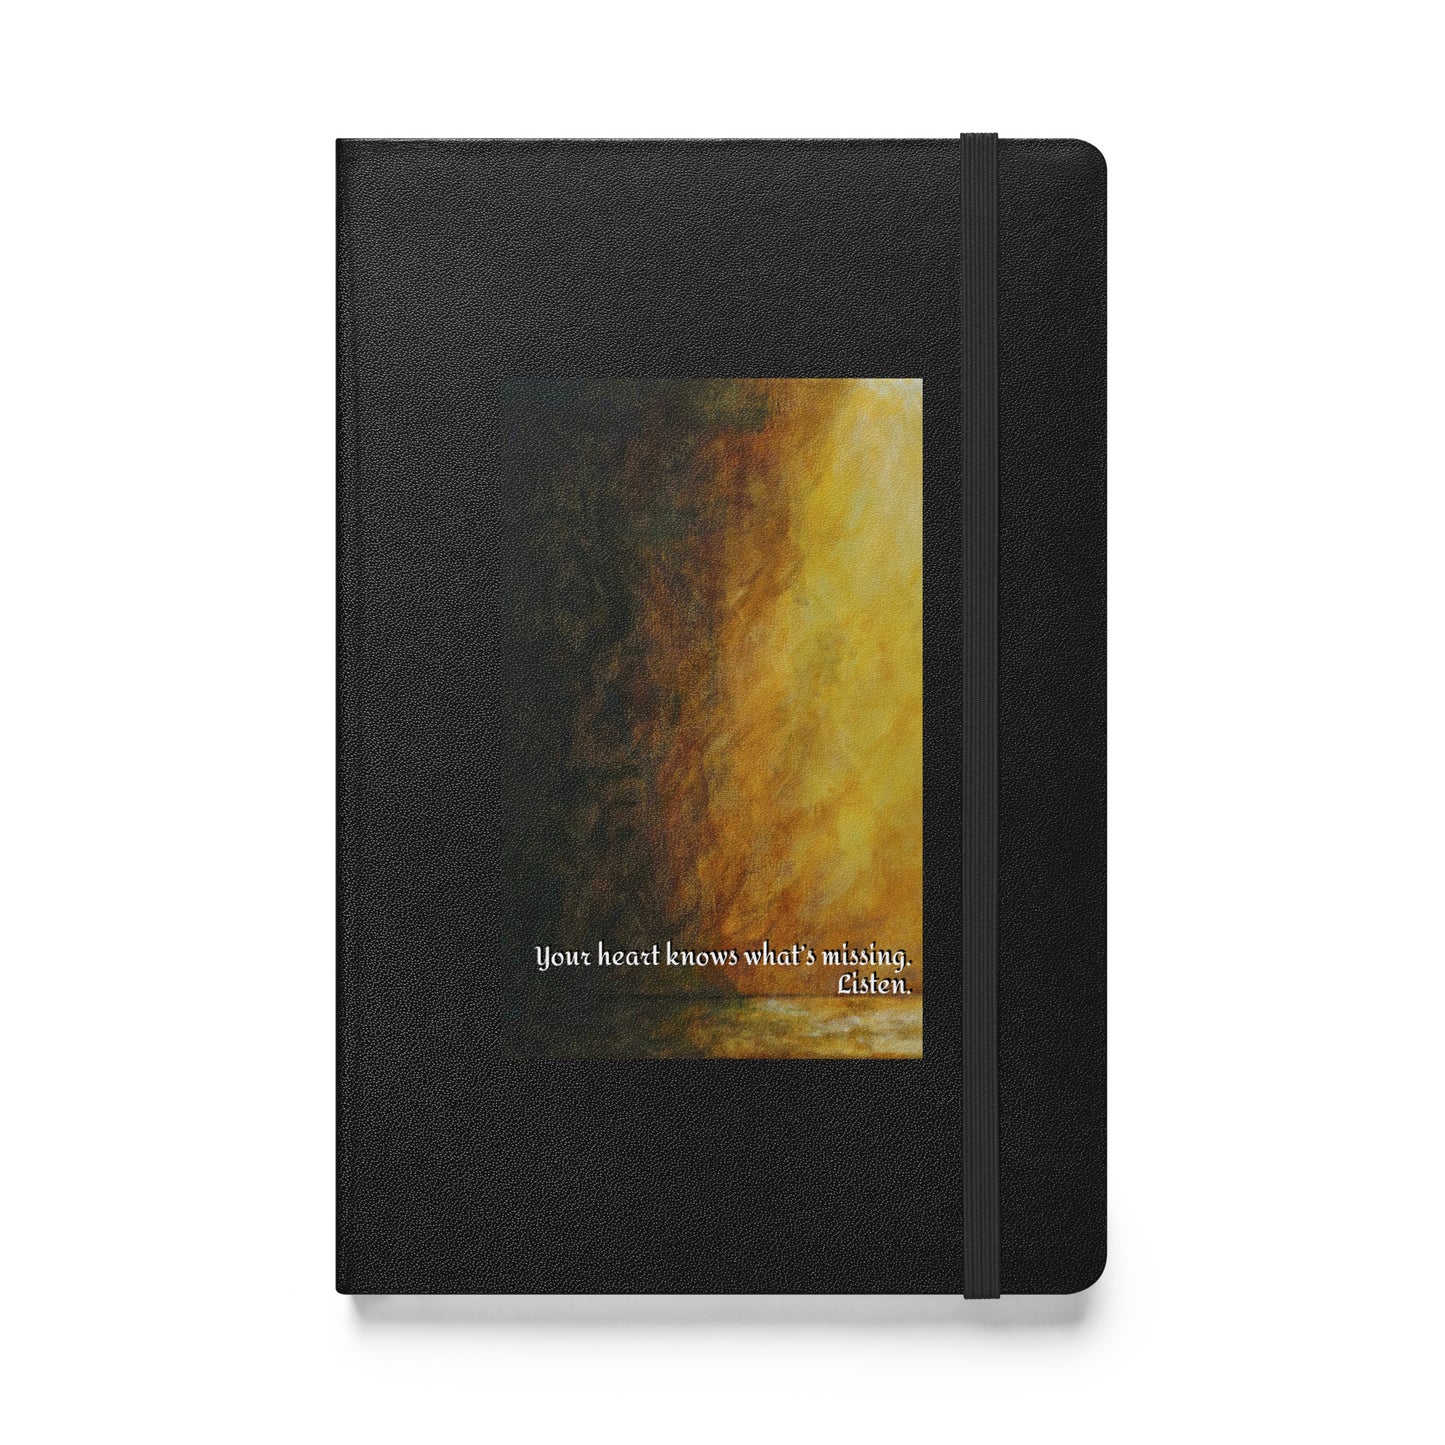 “Your heart knows what is missing. Listen.” - Hardcover bound notebook